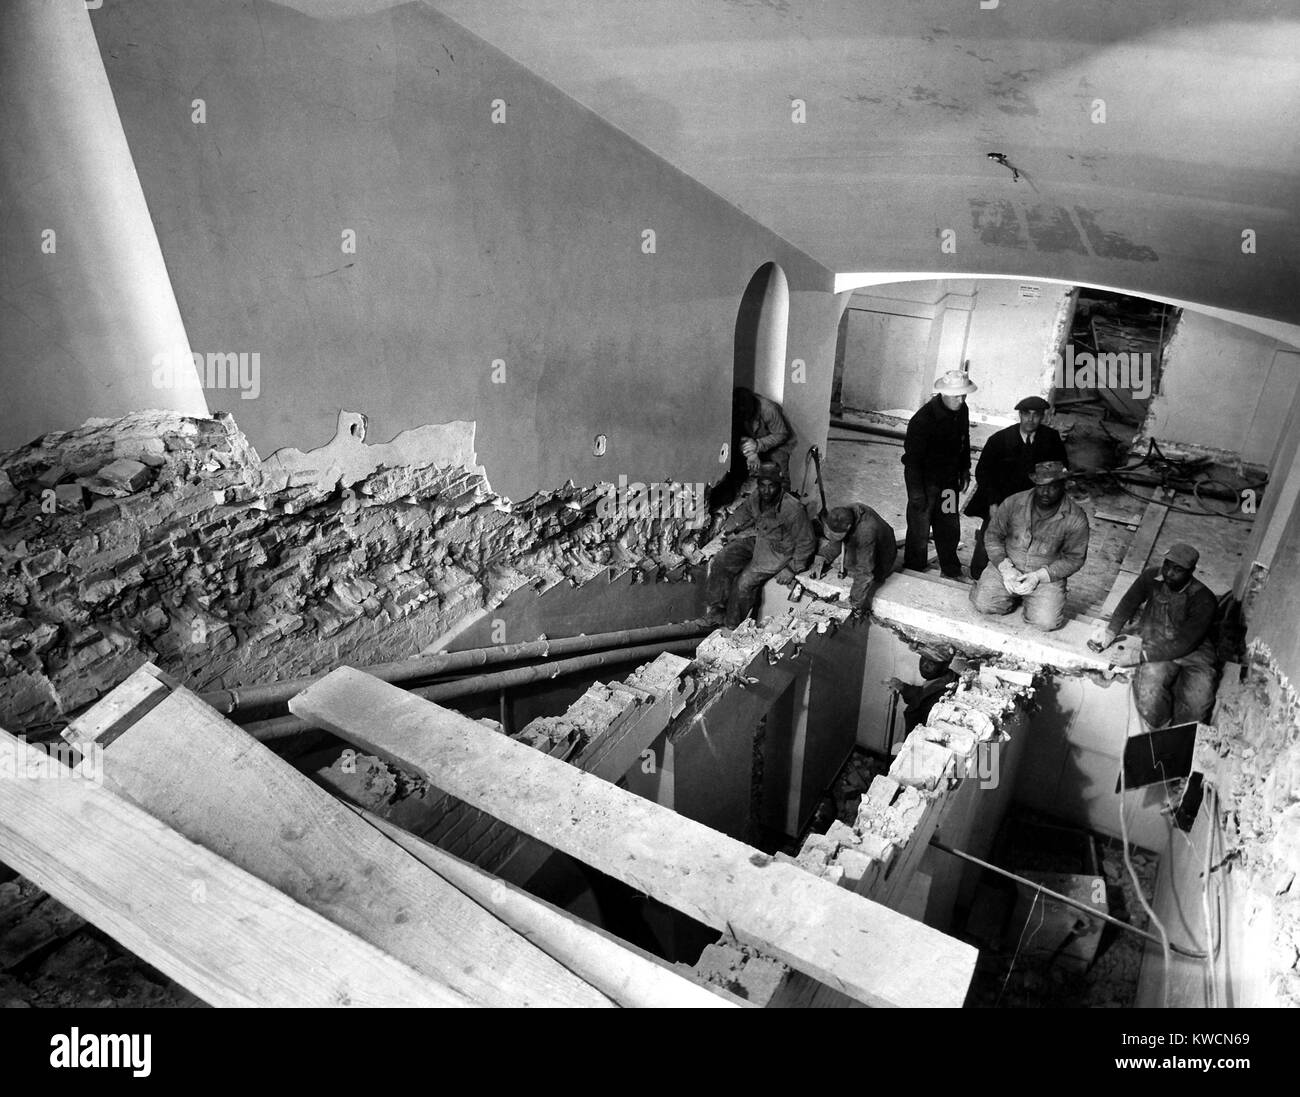 Renovation of the White House during the Truman Administration. Workmen rebuilding the main staircase. Feb. 23, 1950. - (BSLOC 2014 15 119) Stock Photo